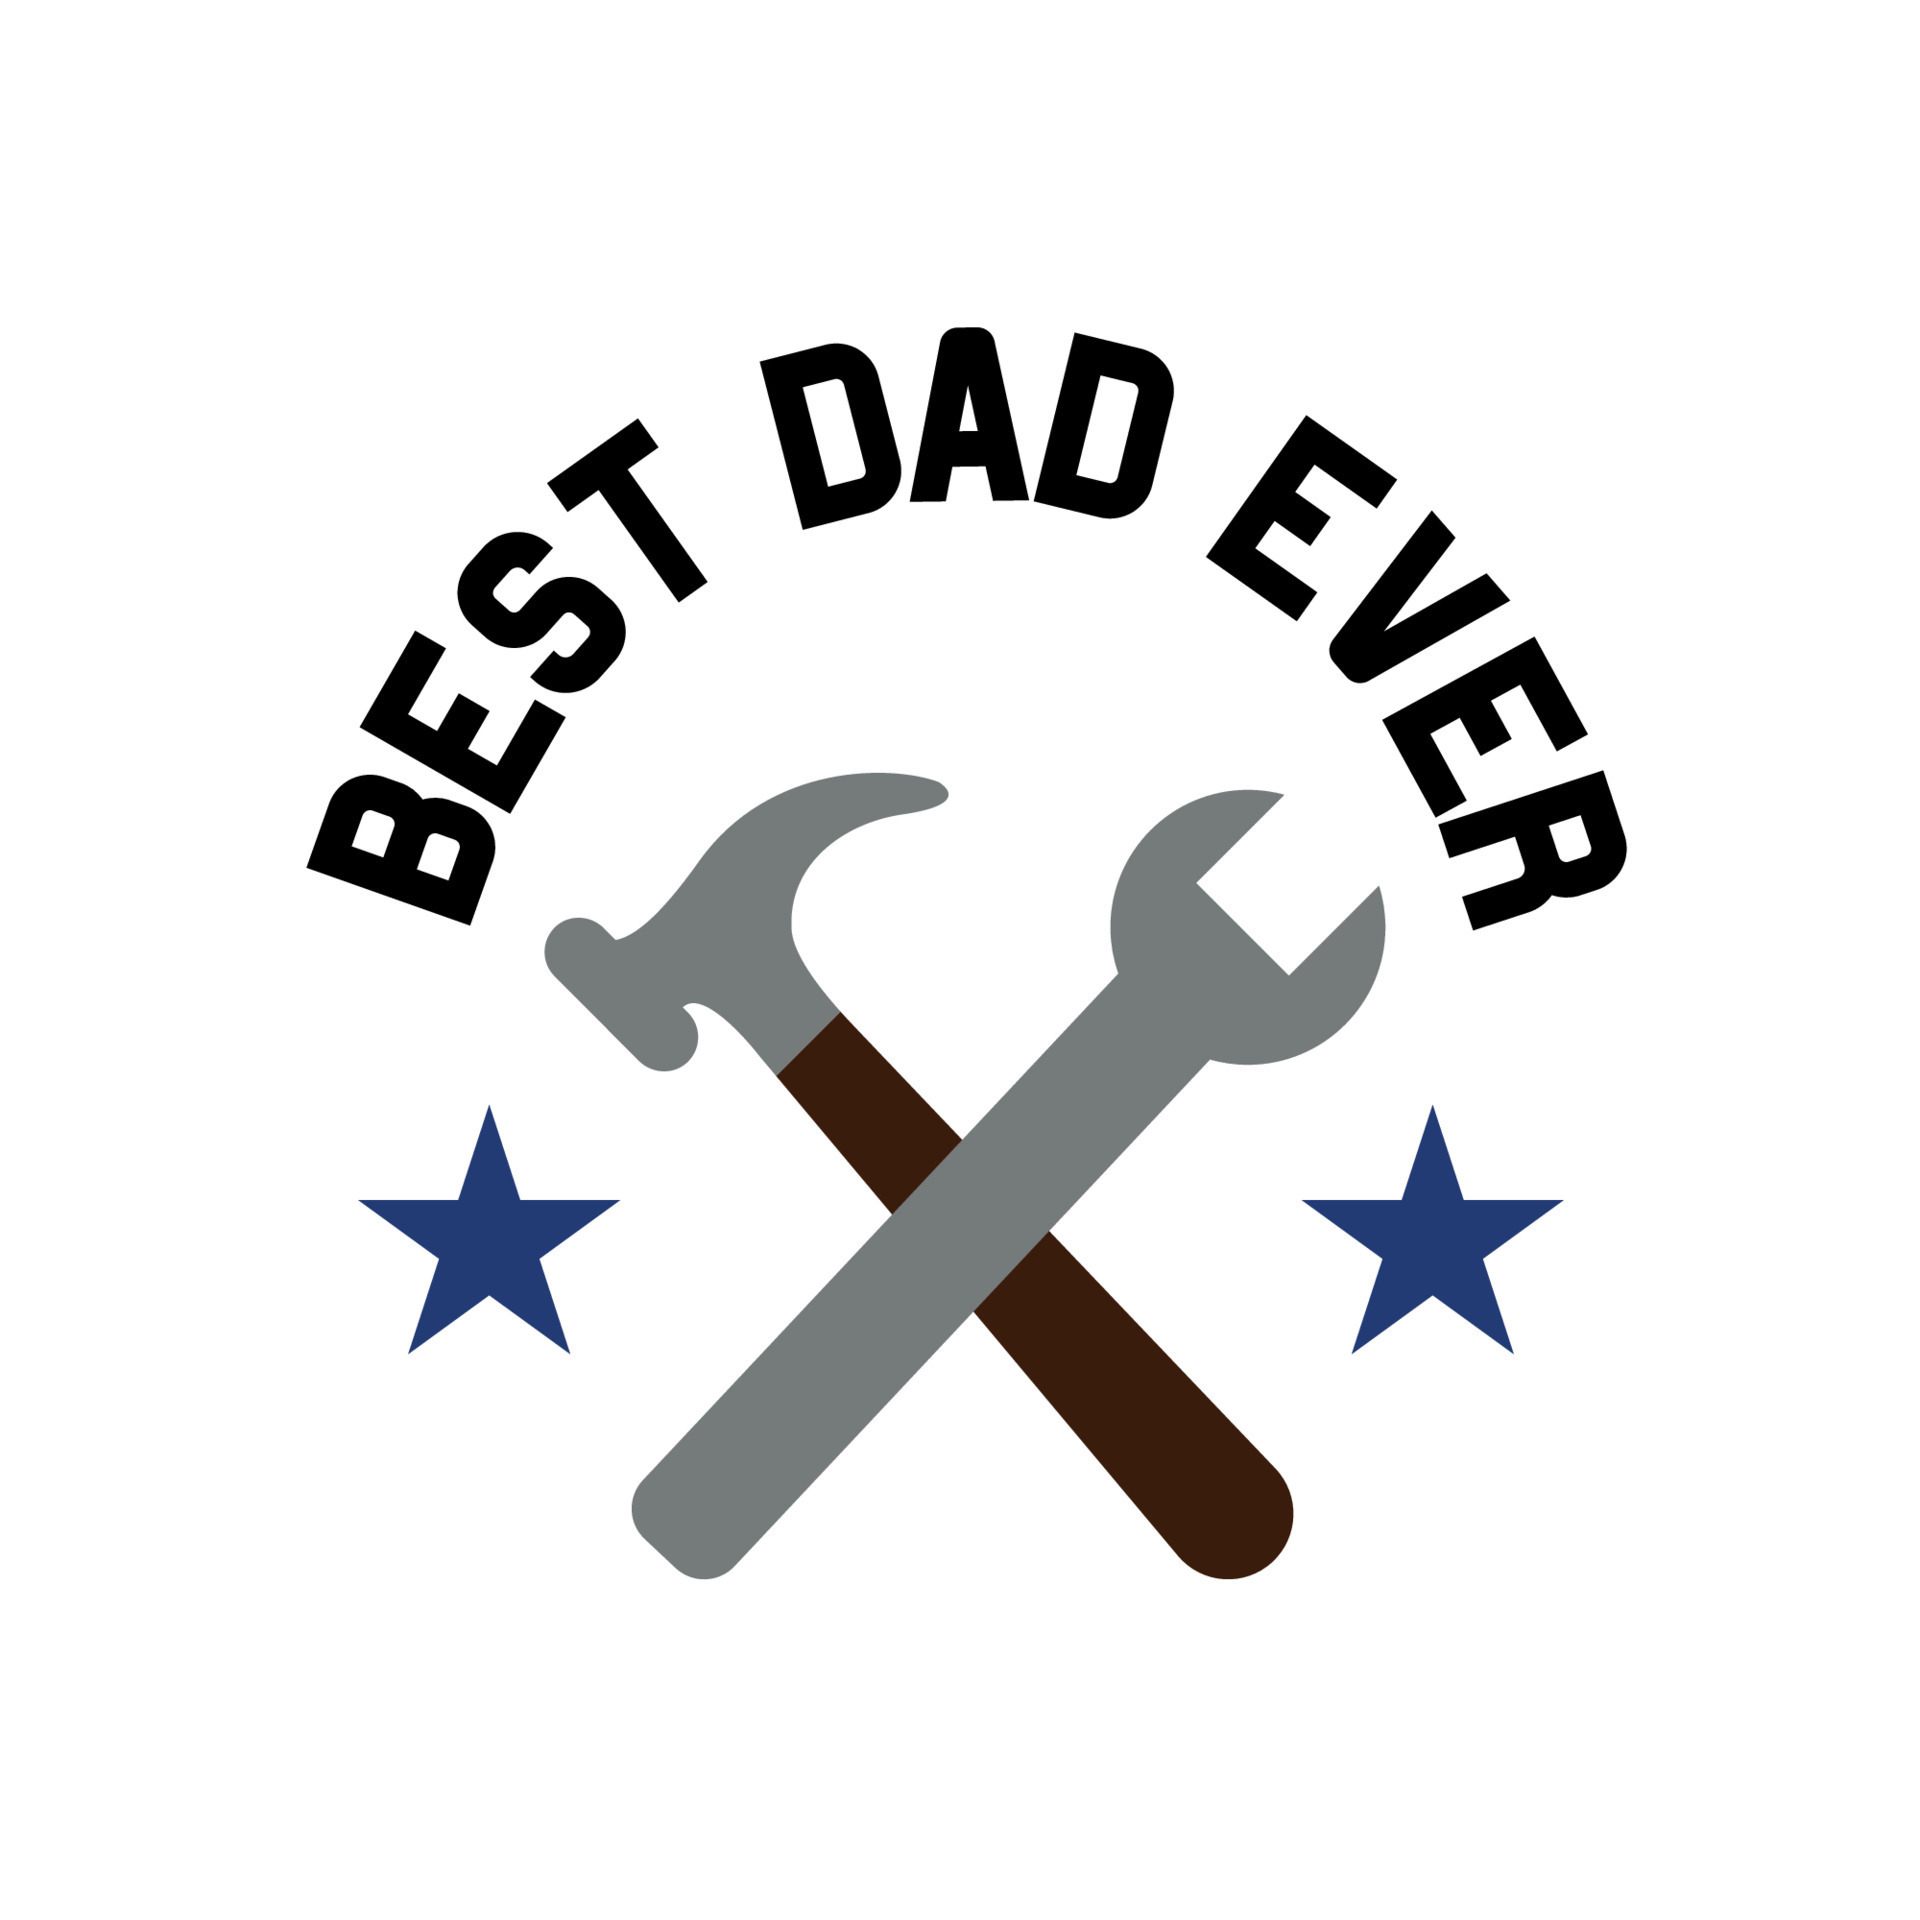 Best dad ever master text fishing rod sign retro style. Vector